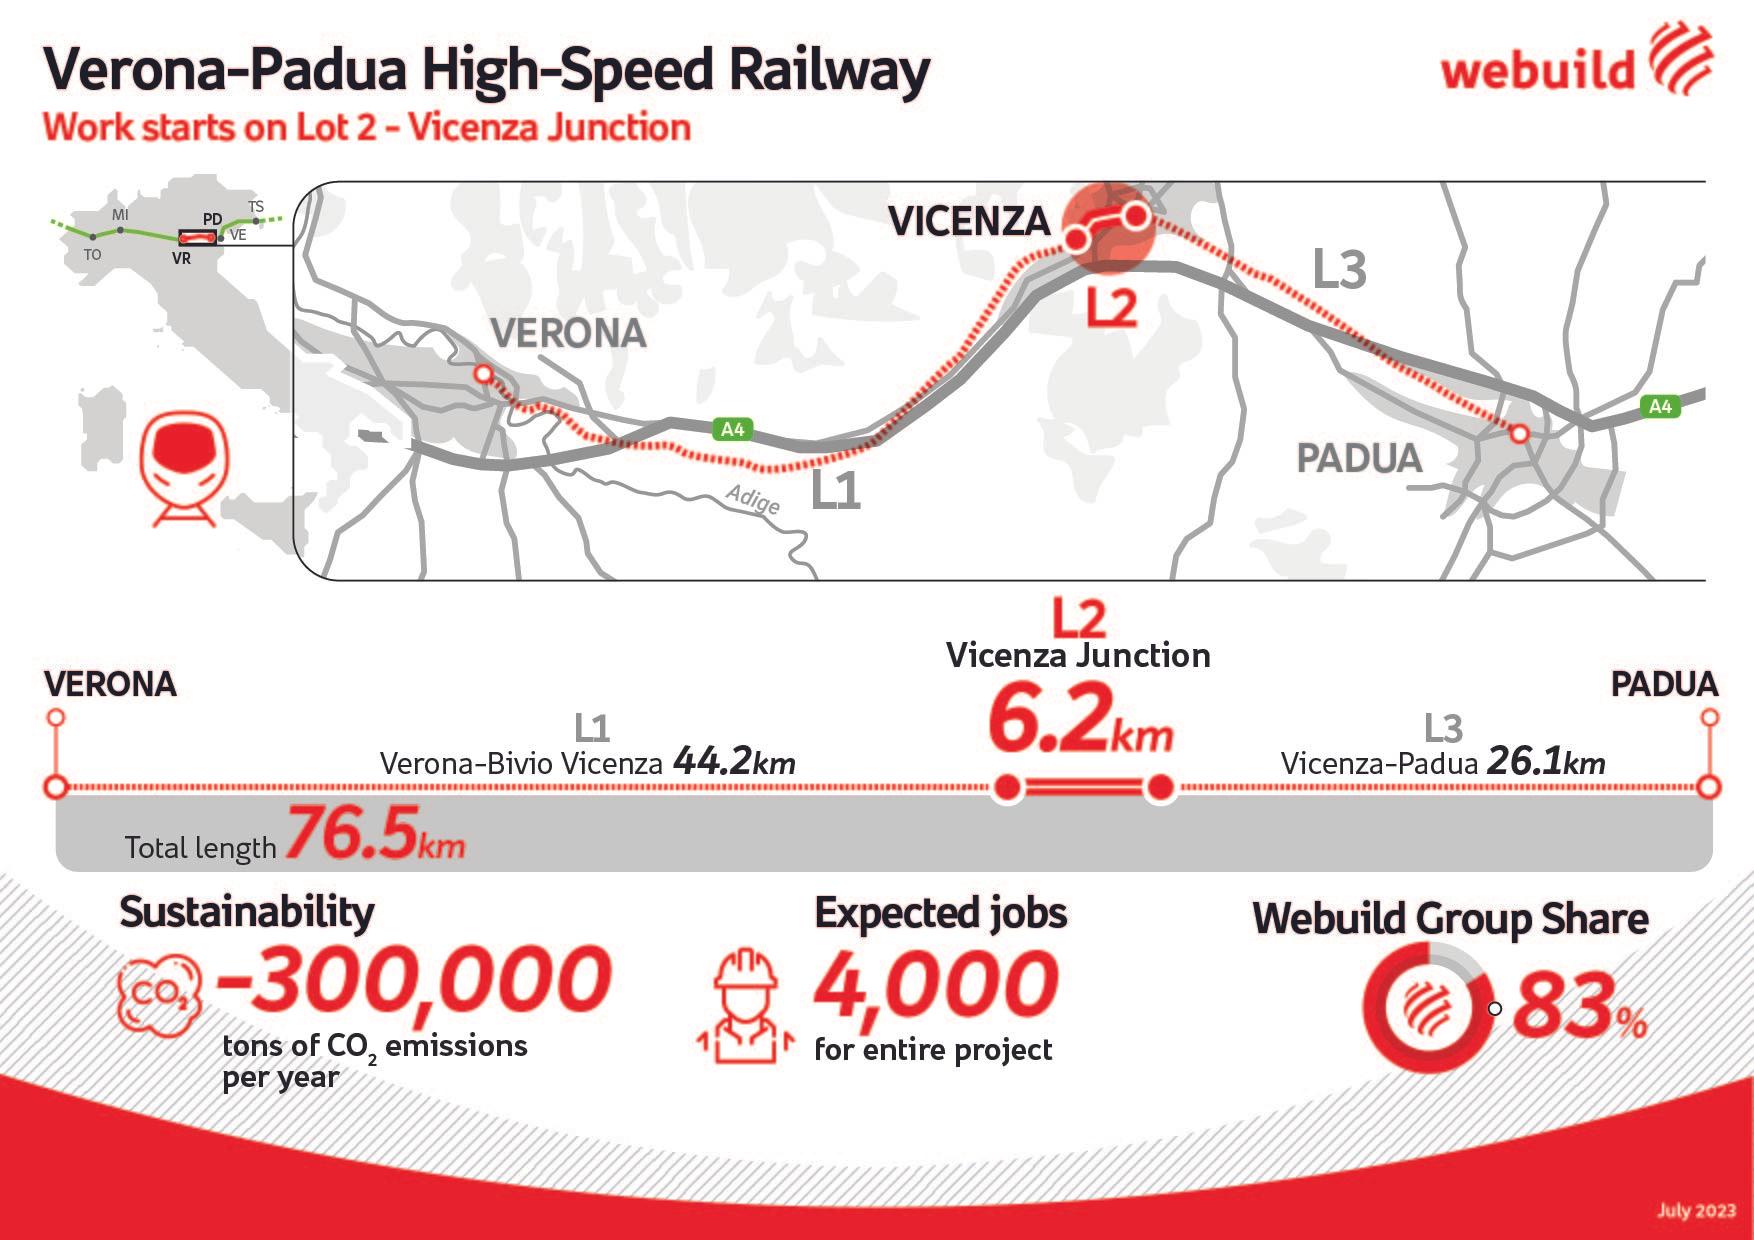 Infograpgic Webuild: contract signed for second lot at Vicenza Junction of Verona-Padua High-Speed Railway